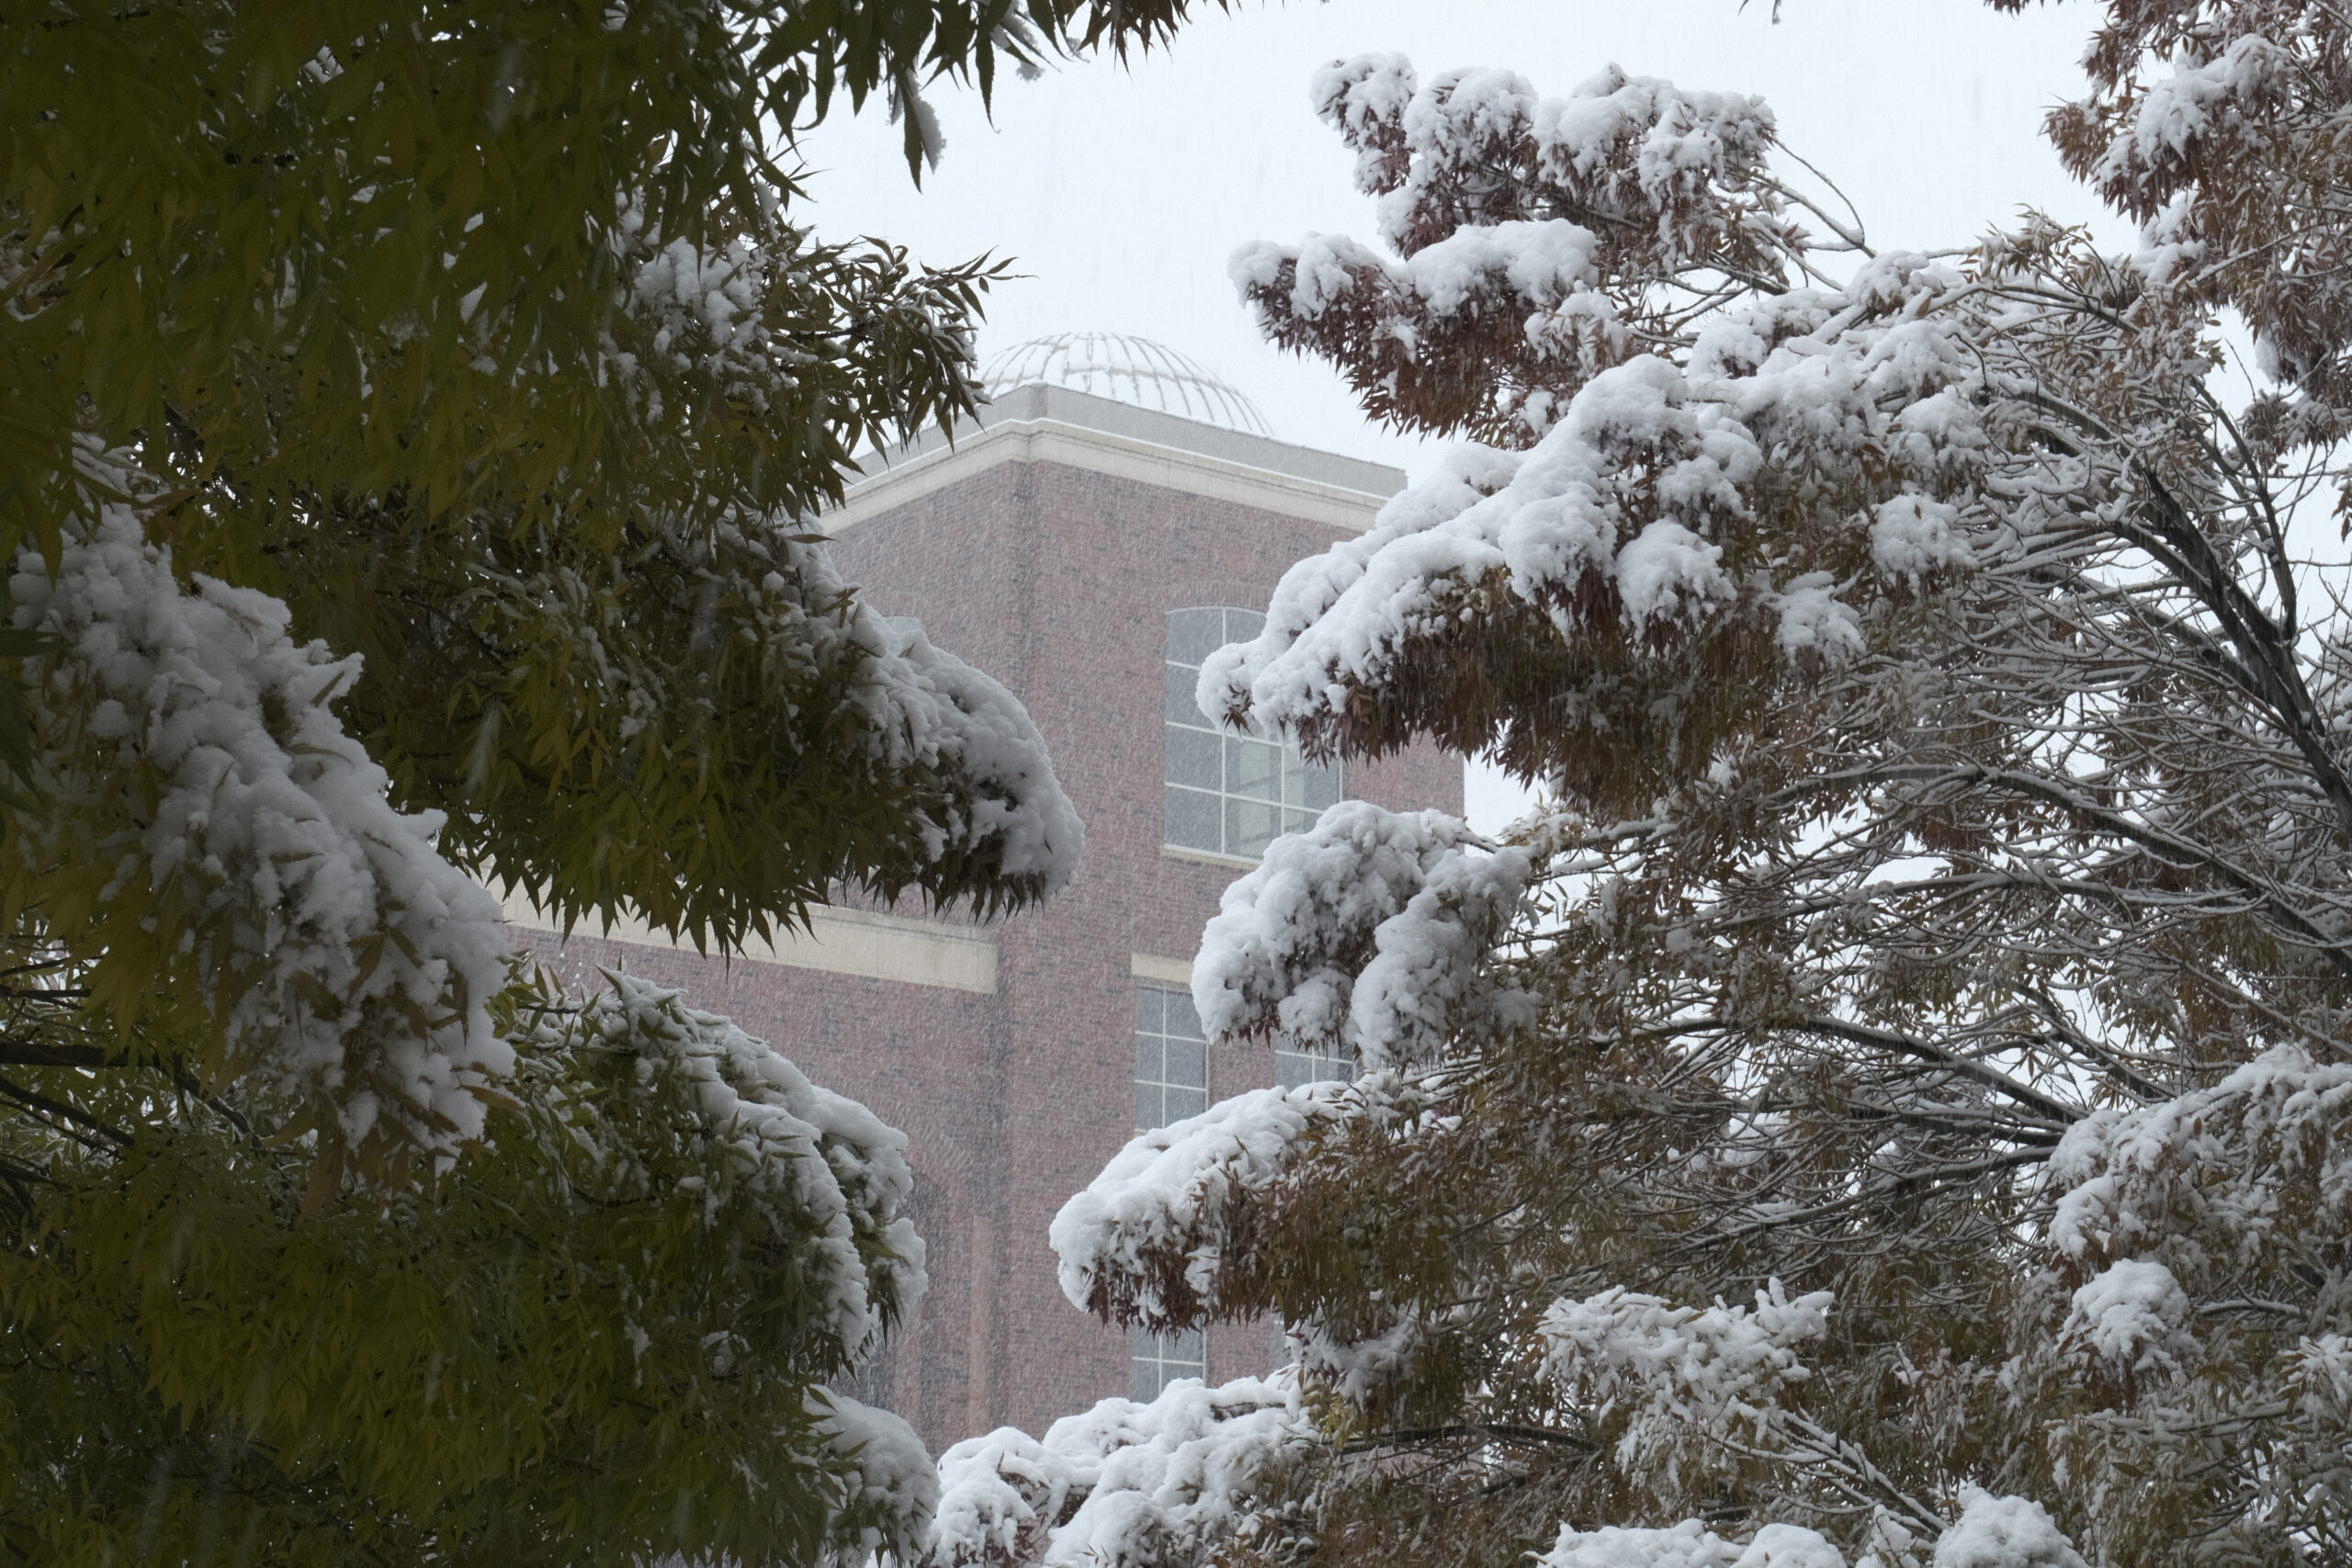 It’s the most wonderful time of the year: snow canceling classes